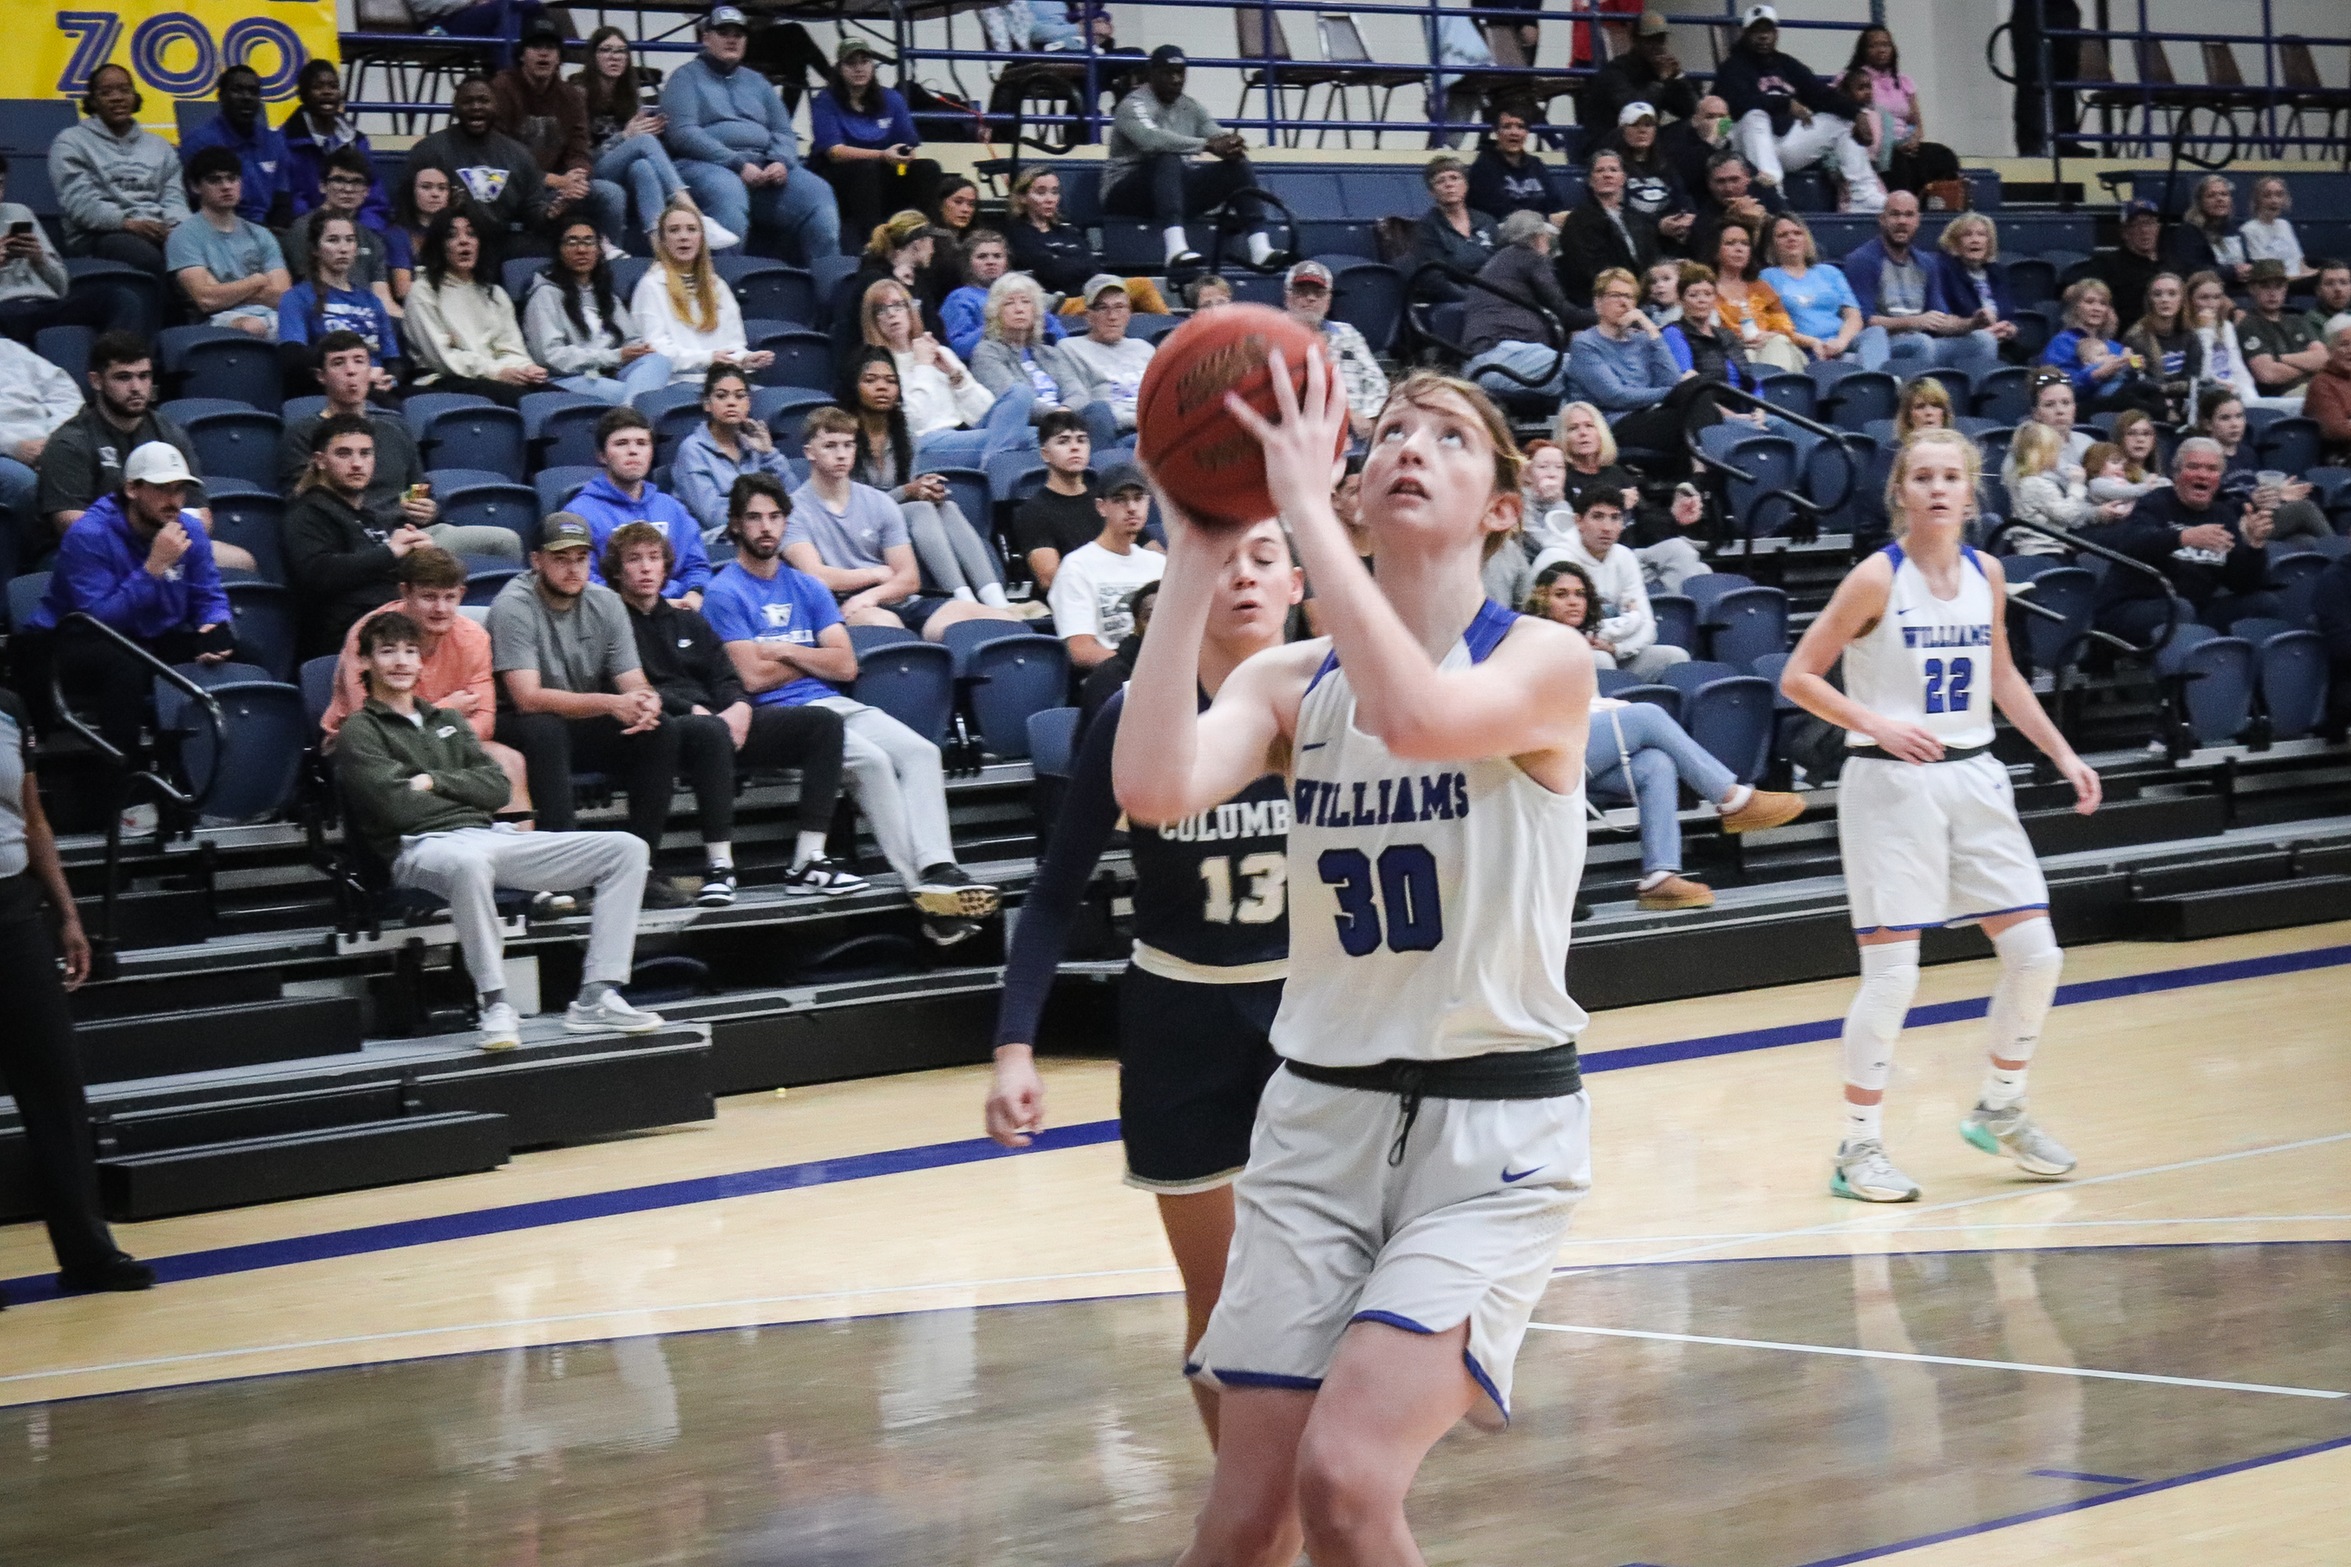 Crowe Leads Lady Eagles to Fifth Straight Win